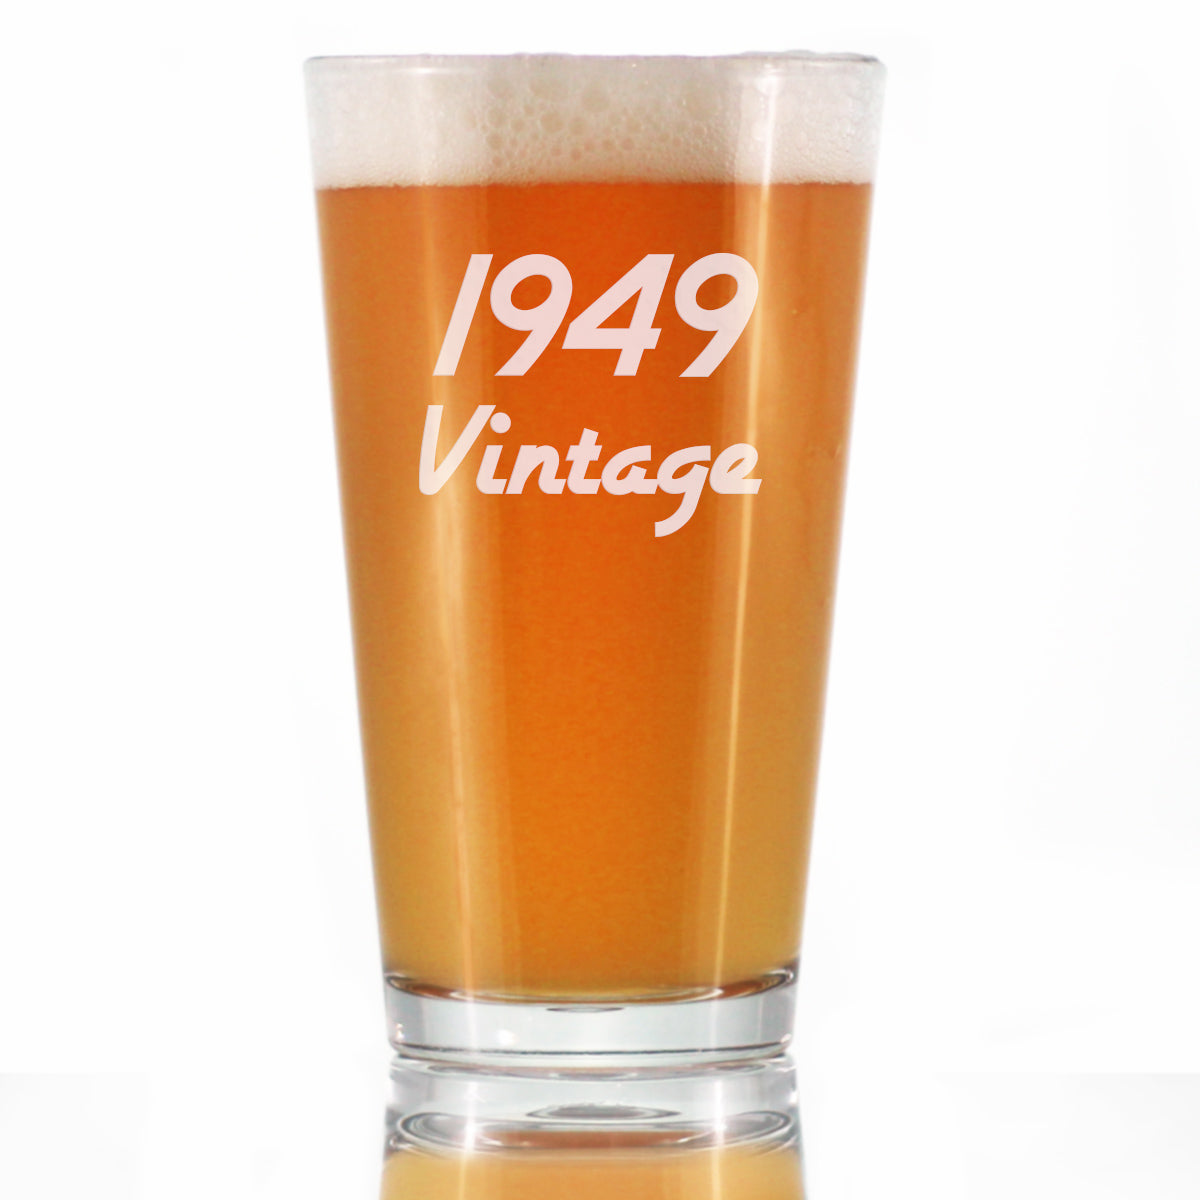 Vintage 1949 - Pint Glass for Beer - 75th Birthday Gifts for Men or Women Turning 75 - Fun Bday Party Decor - 16 oz